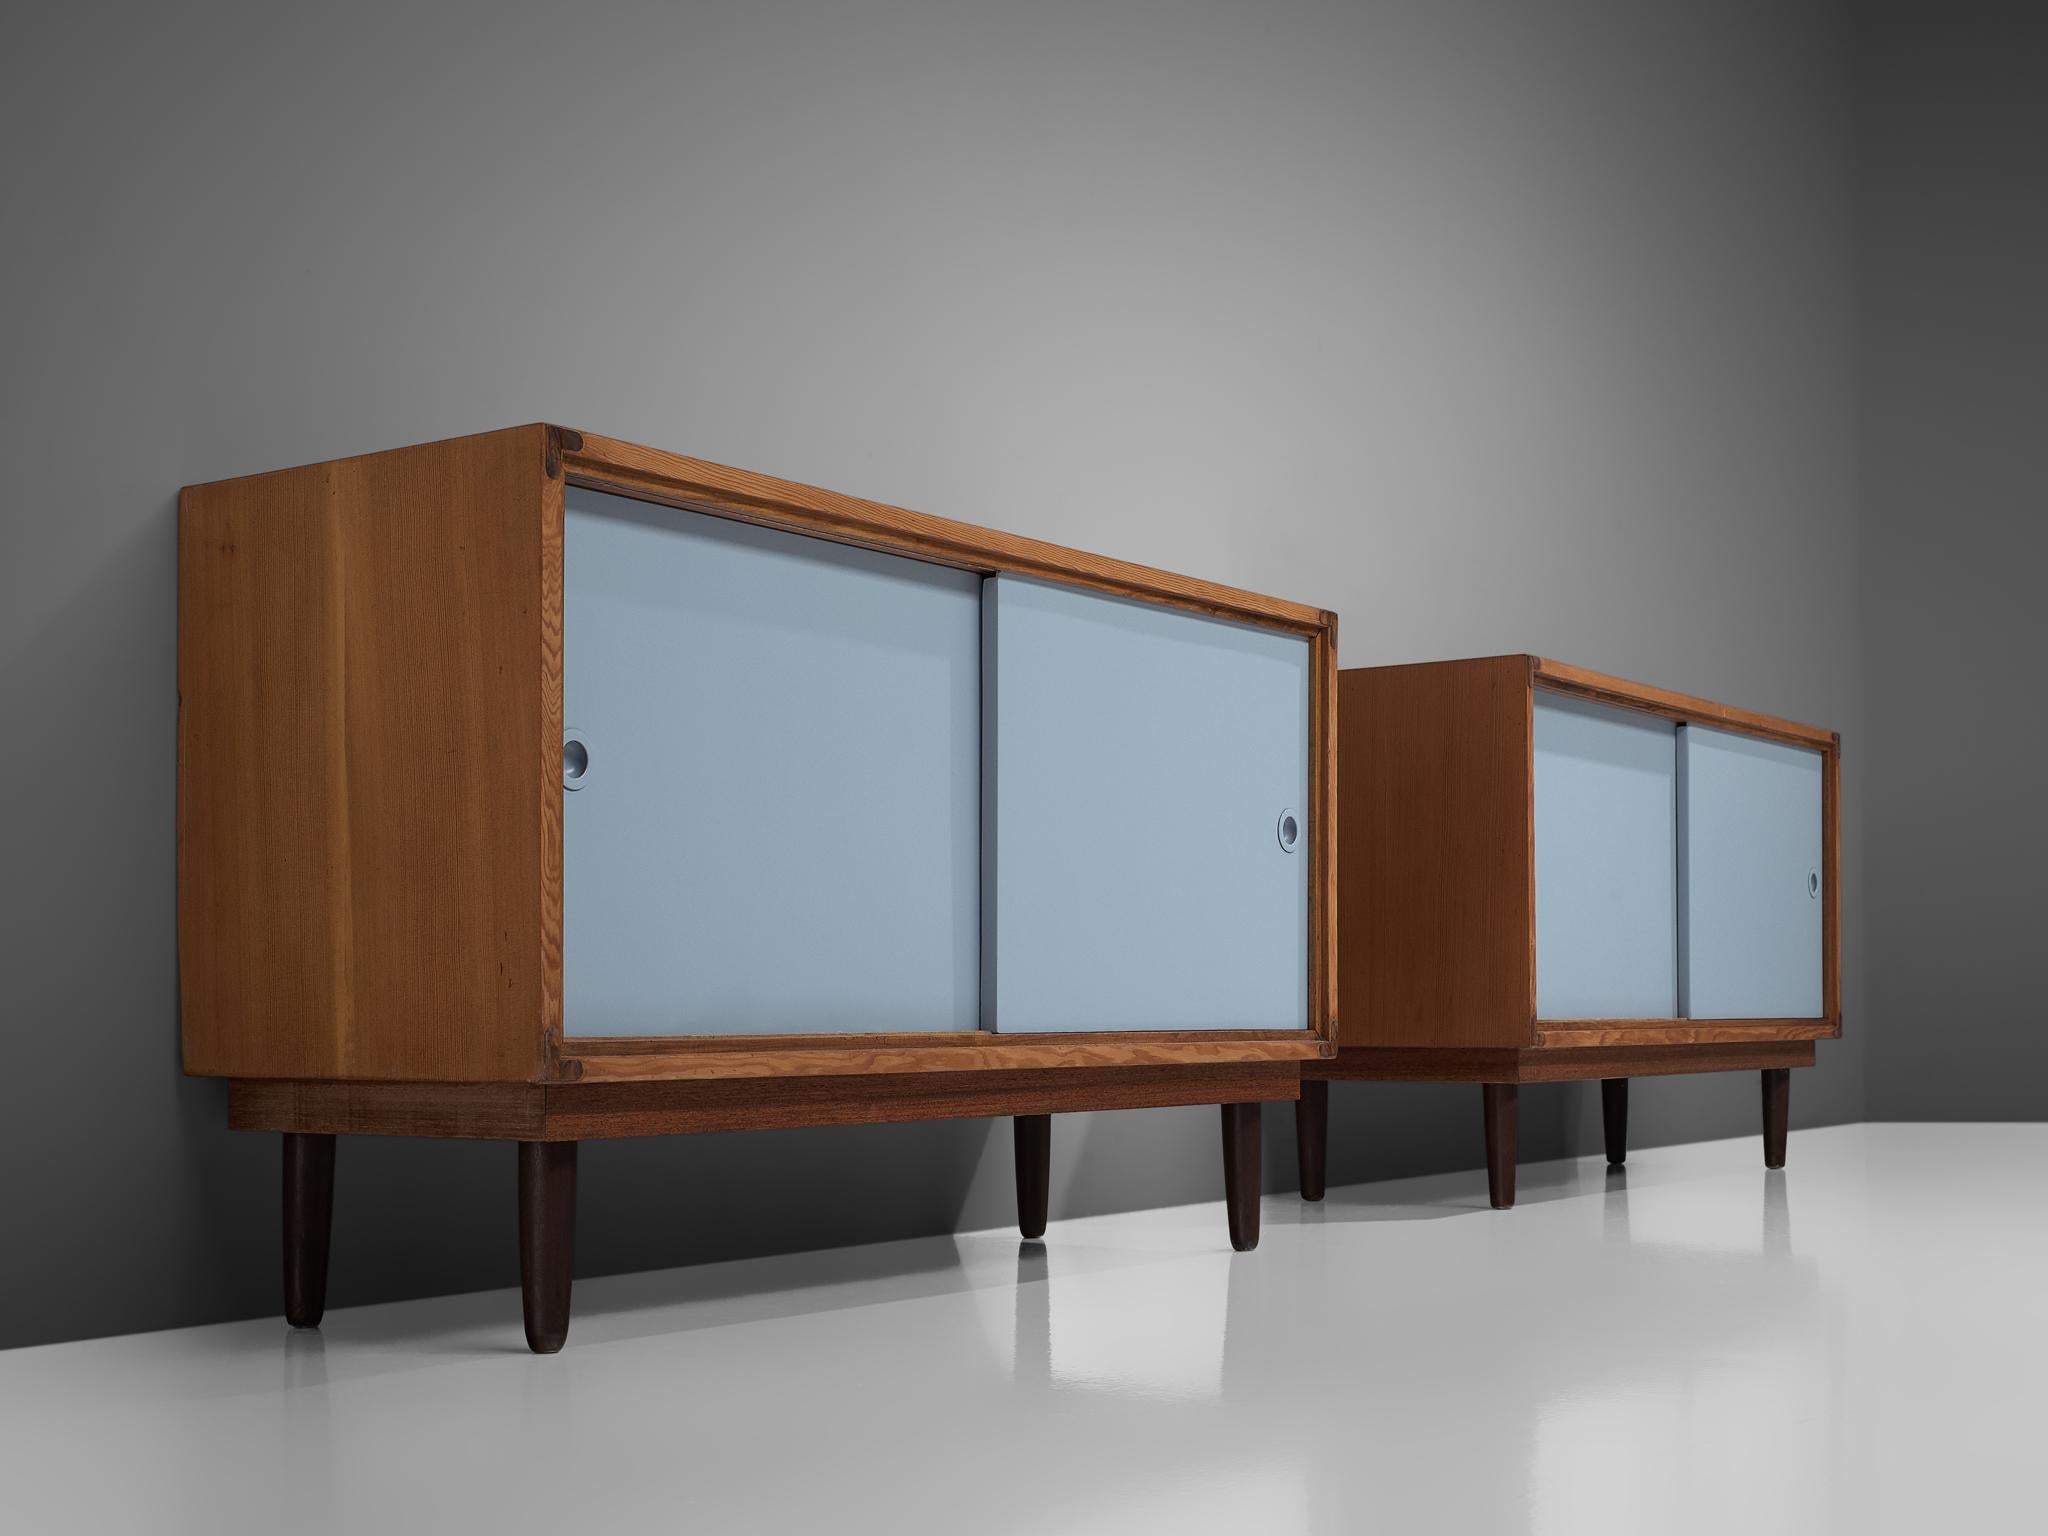 Danish solid pine cabinets with blue sliding doors, Denmark, 1950s

These cabinets show a basic design, with a rectangular front placed on tapered round legs. Due to the legs it has a light appearance. 
The warm expression of the wood nicely